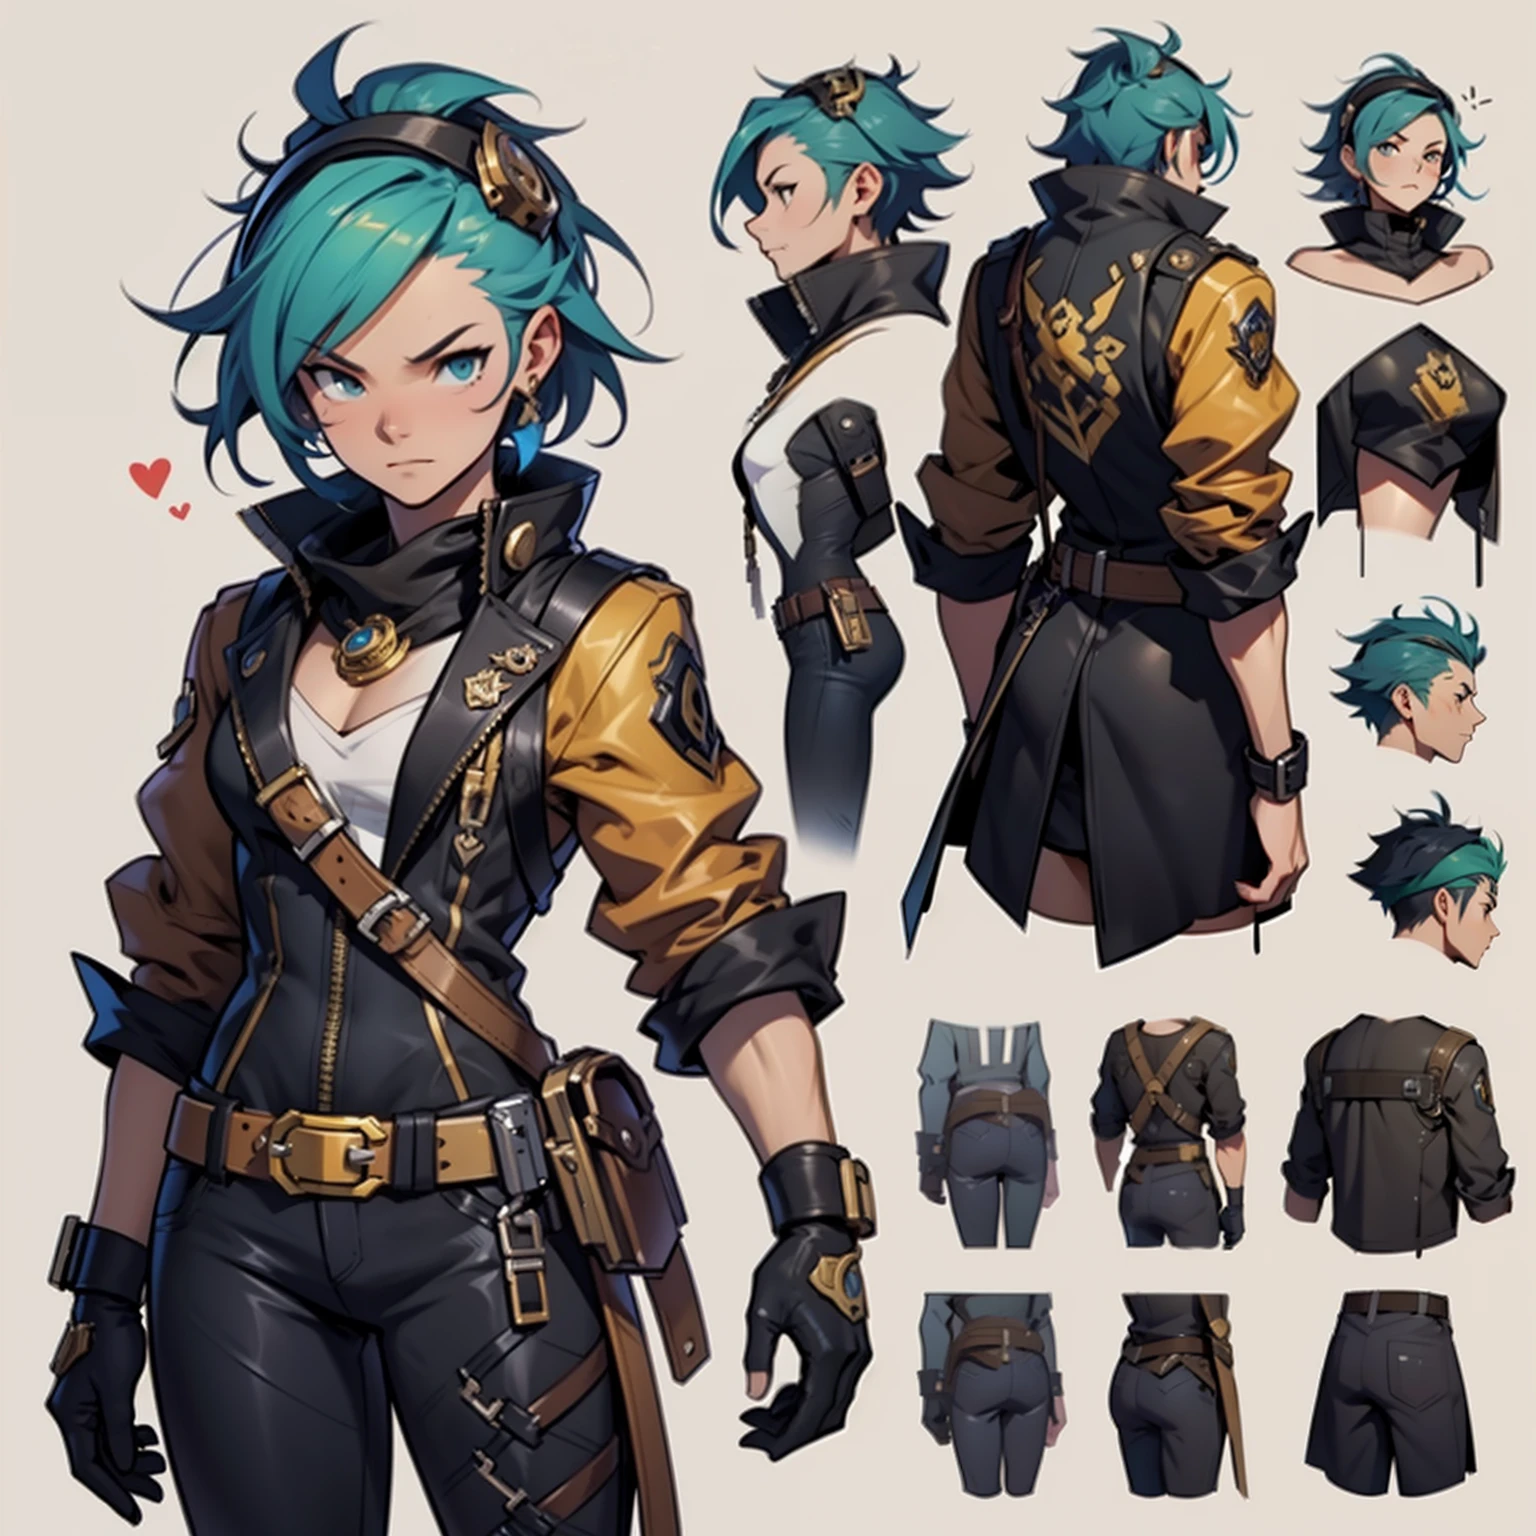 Close-up of a man in a gun costume, ((character concept art)), ((character design sheet, same character, front, side, back)) maple story character art, video game character design, video game character design, maple story gun girl, expert high detail concept art, metal bullet concept art, funny character design, Lucio as a woman, gravity rush inspiration, sticky tar. Concept art, belt buckle at waist, steampunk weapon,